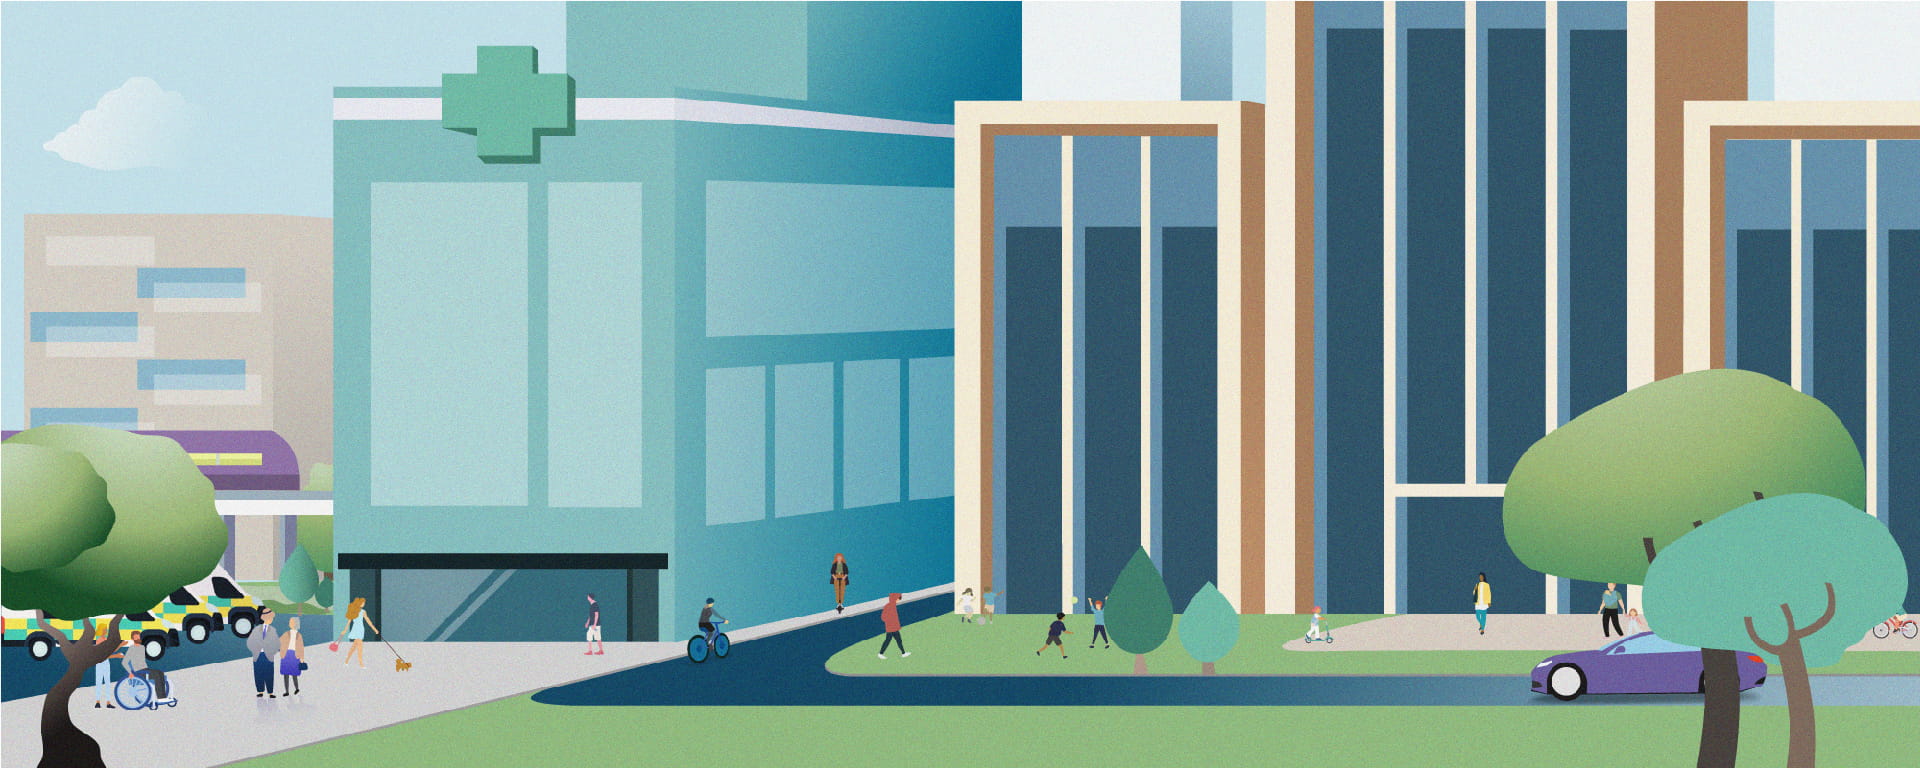 Graphic of office and hospital buildings with nature